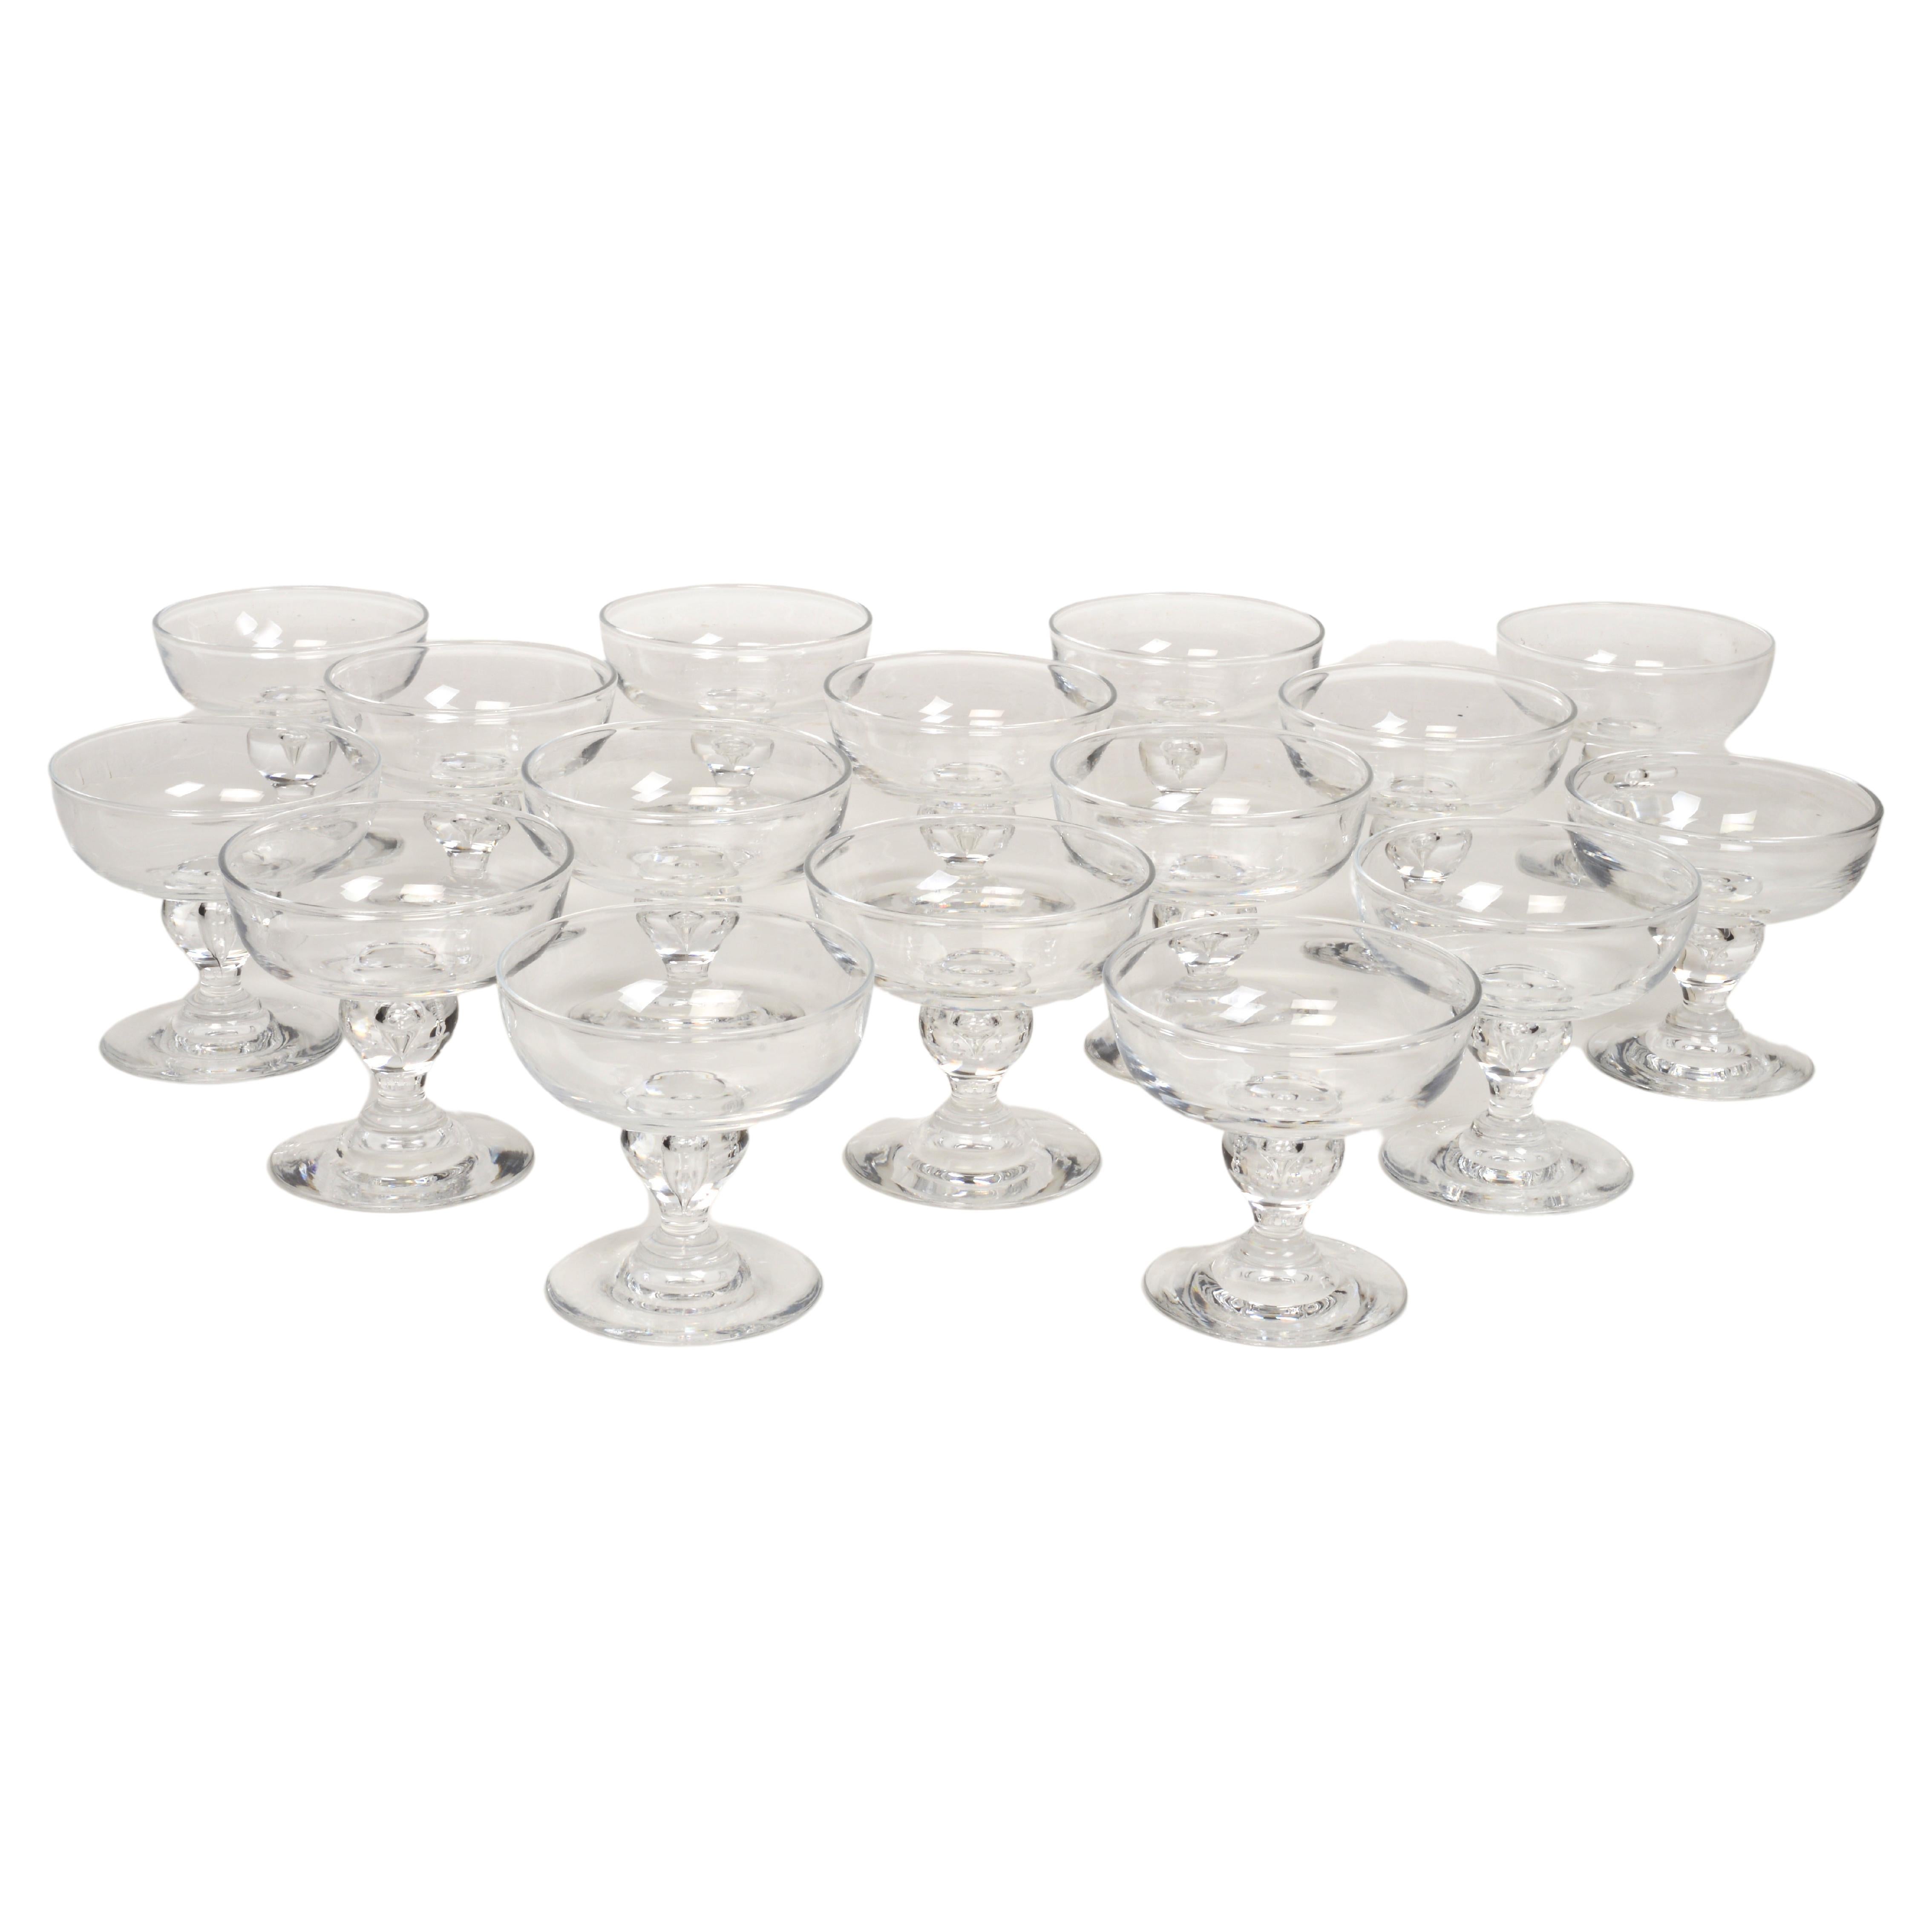 Set of 16 George Thompson Designed Steuben Champagne/Coupe/Tall Sherbet Glasses